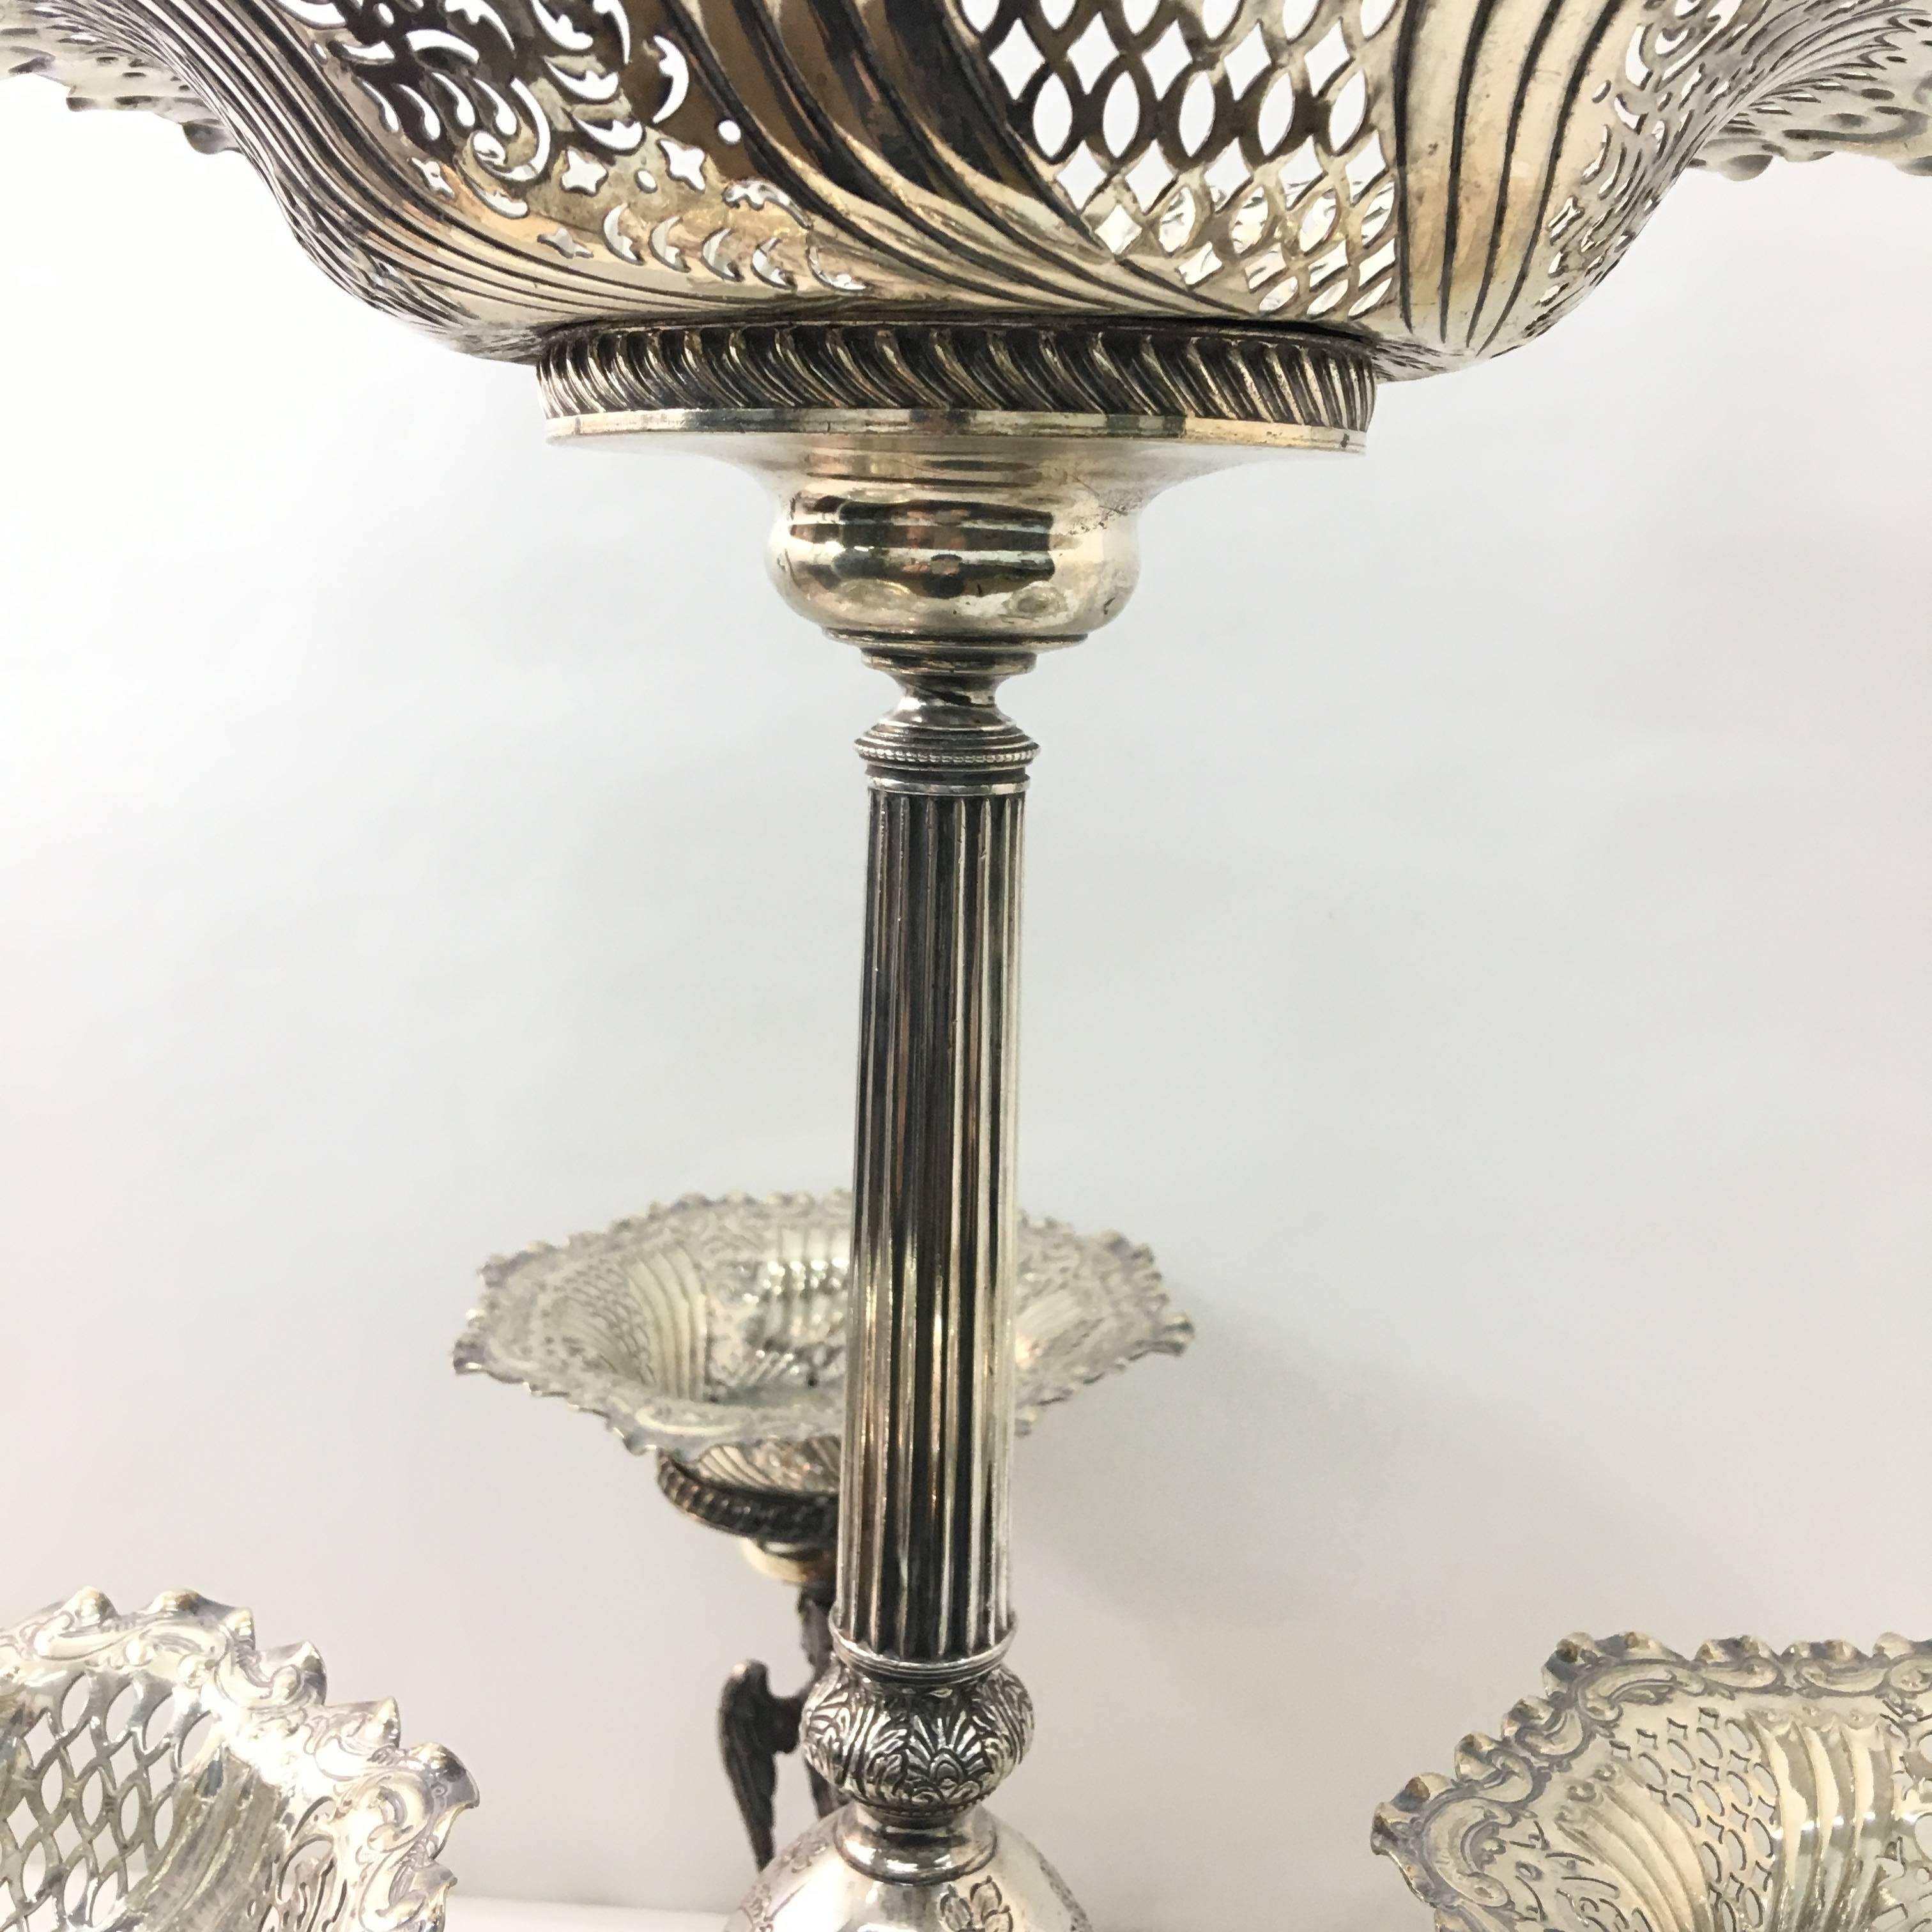 Sheffield Plate English Victorian Epergne by Mappin & Webb, circa 1870